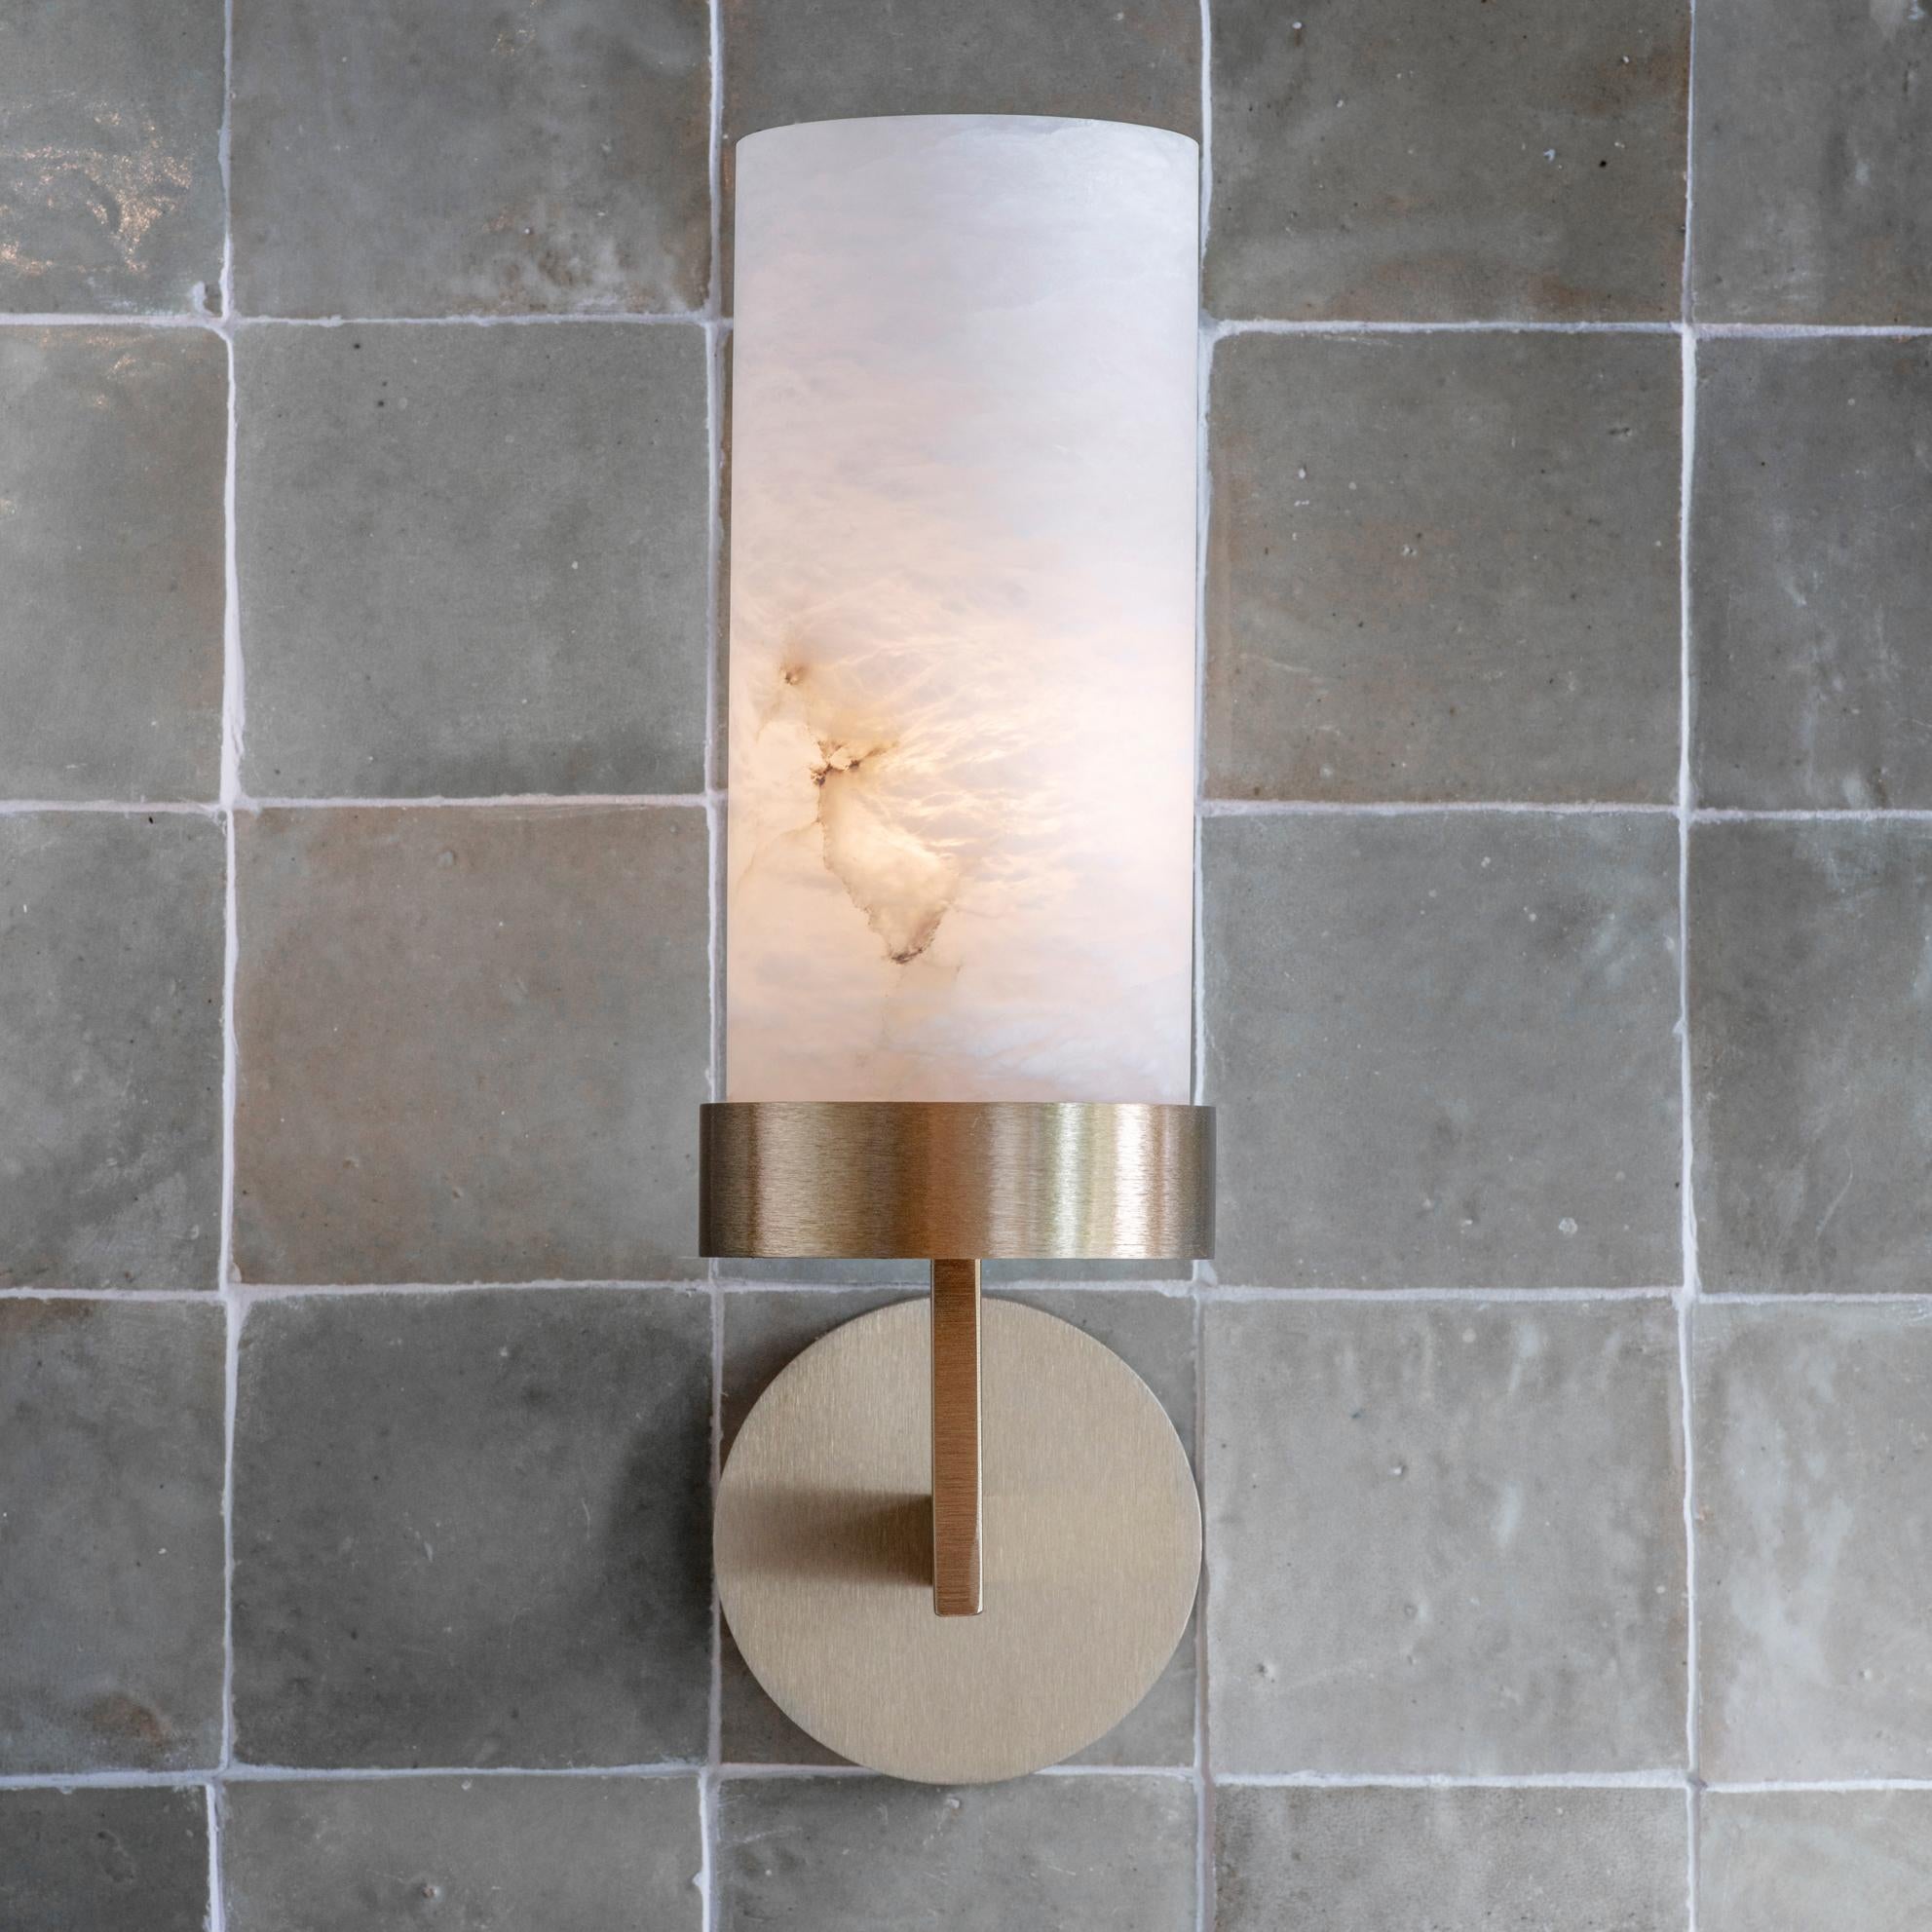 An elegant wall light featuring shades hewn from solid alabaster. The soft opalescent alabaster shade is offset by the clean contemporary lines of the hand-grained metalwork. When lit, the alabaster shade offers a stunning diffused light and